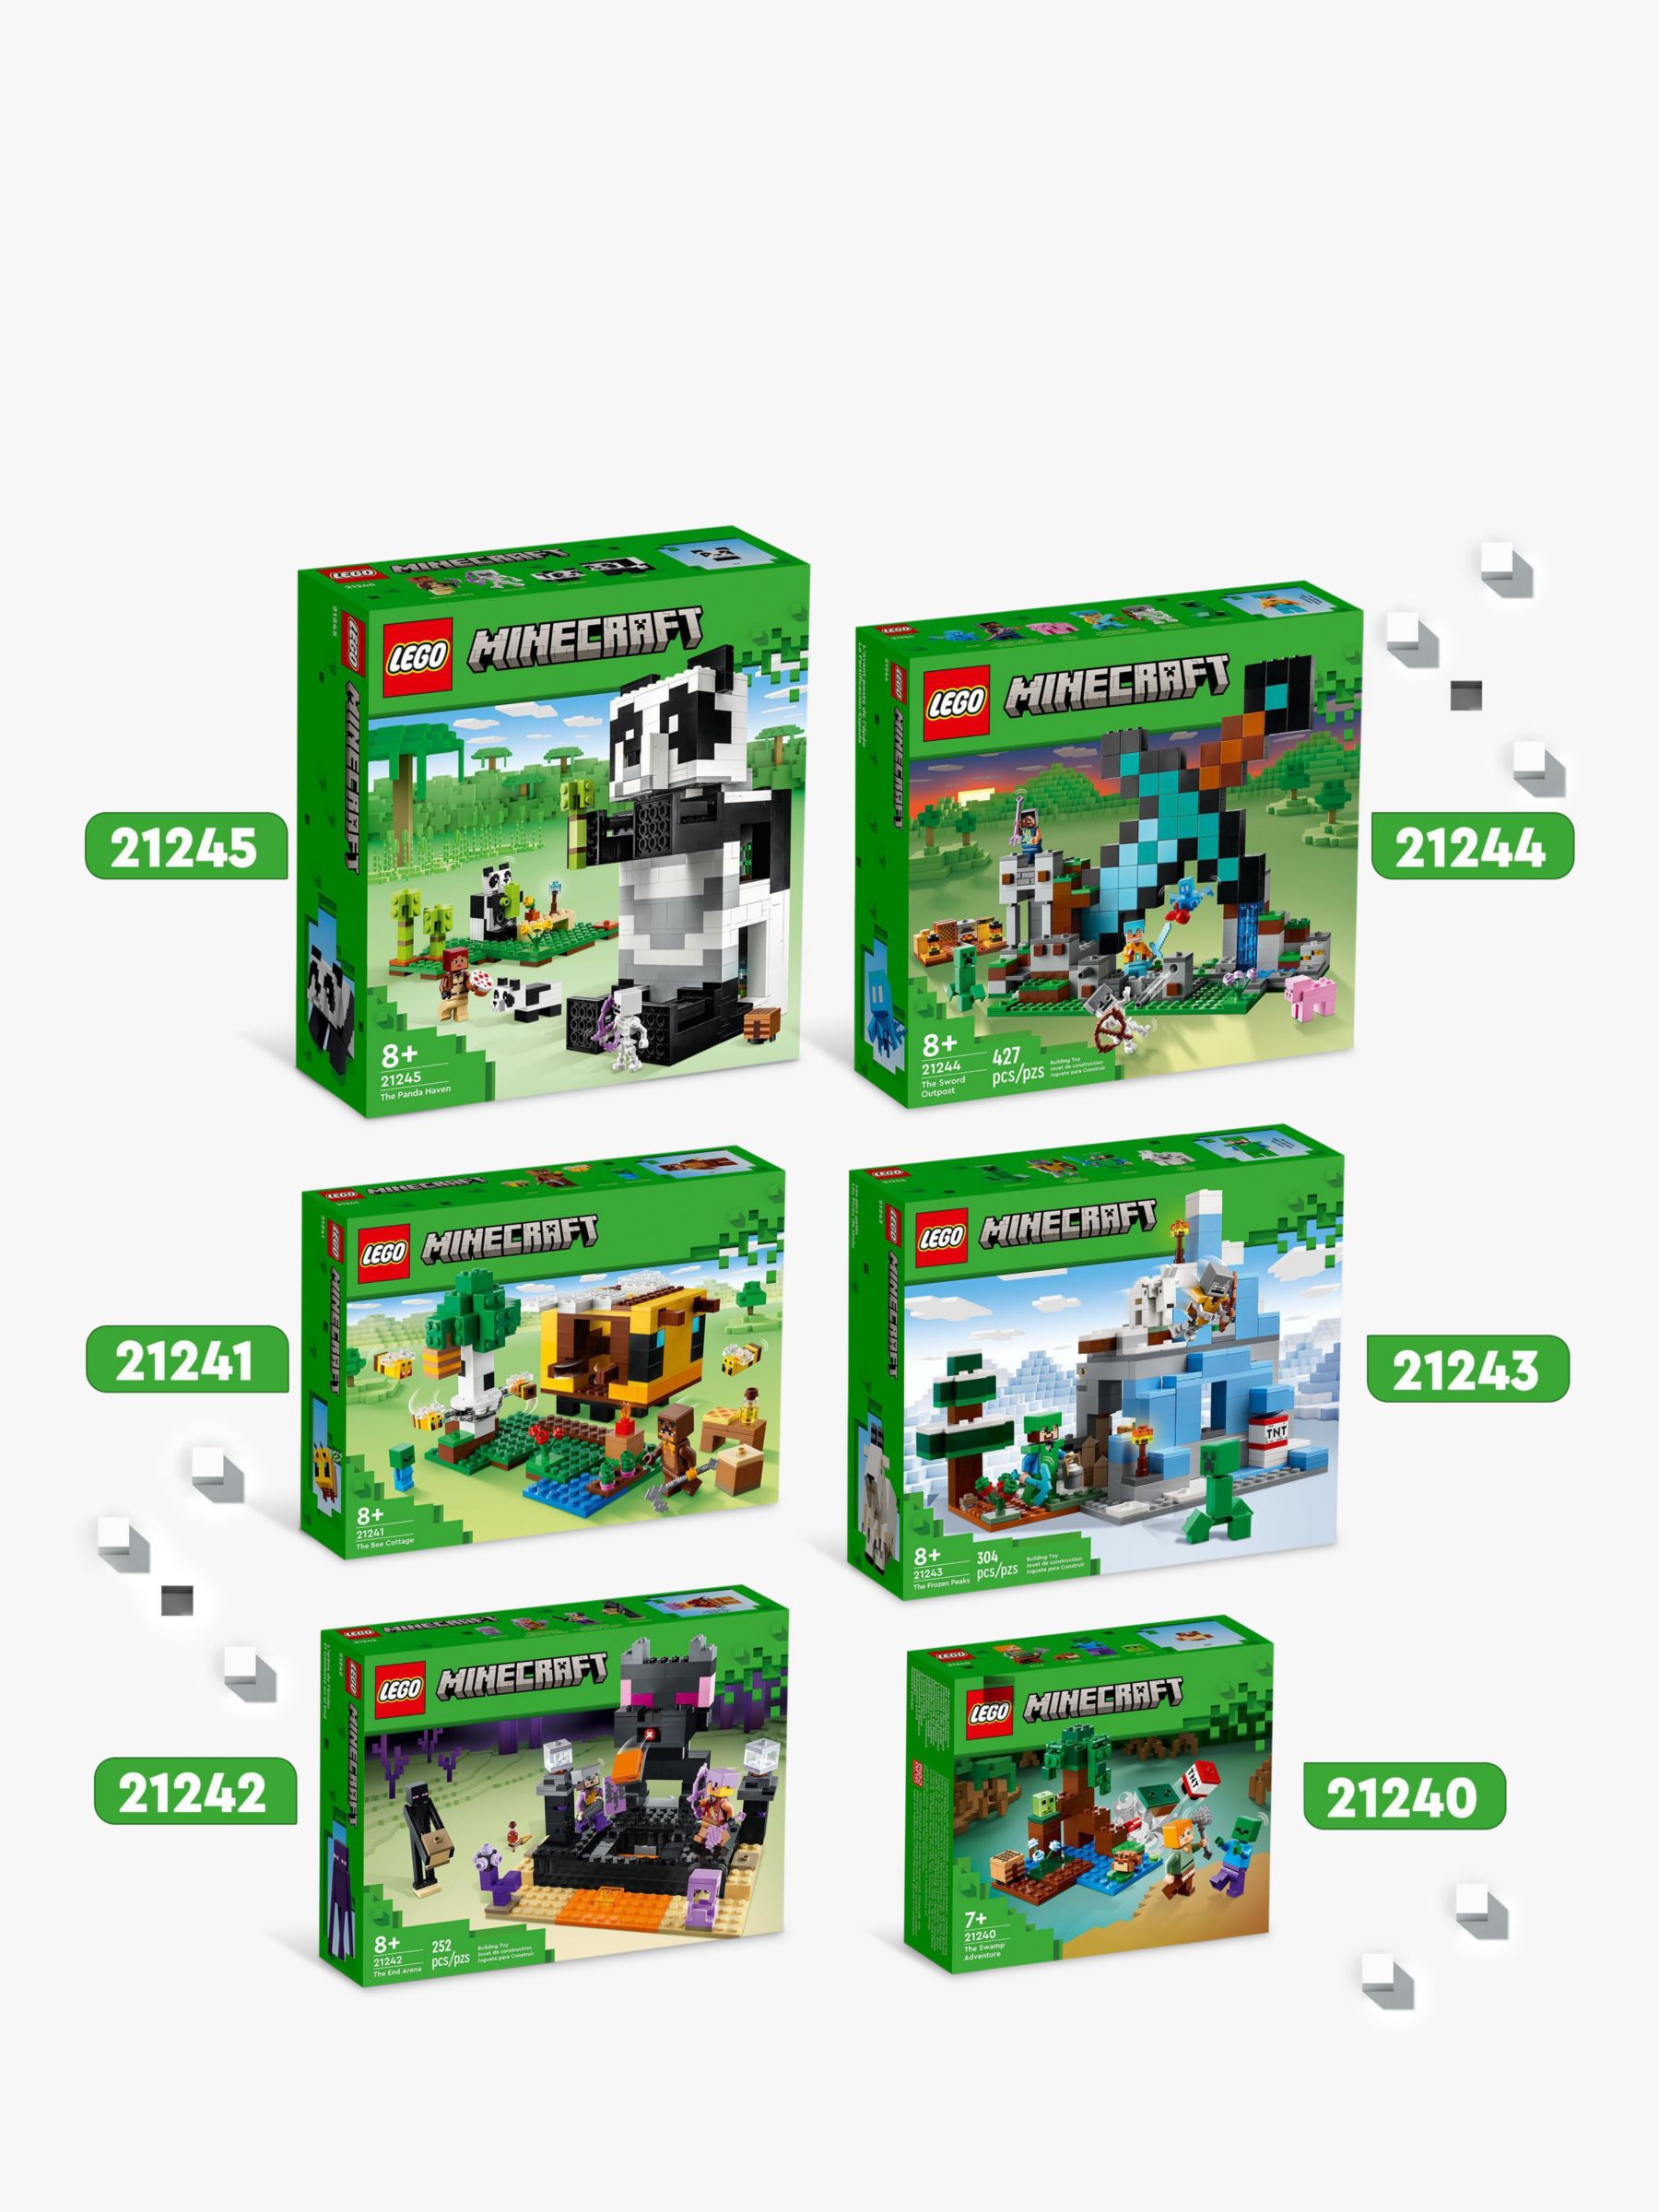 LEGO Minecraft The Bee Cottage 21241 Building Set - Construction Toy with  Buildable House, Farm, Baby Zombie, and Animal Figures, Game Inspired  Birthday Gift Idea for Boys and Girls Ages 8+ 